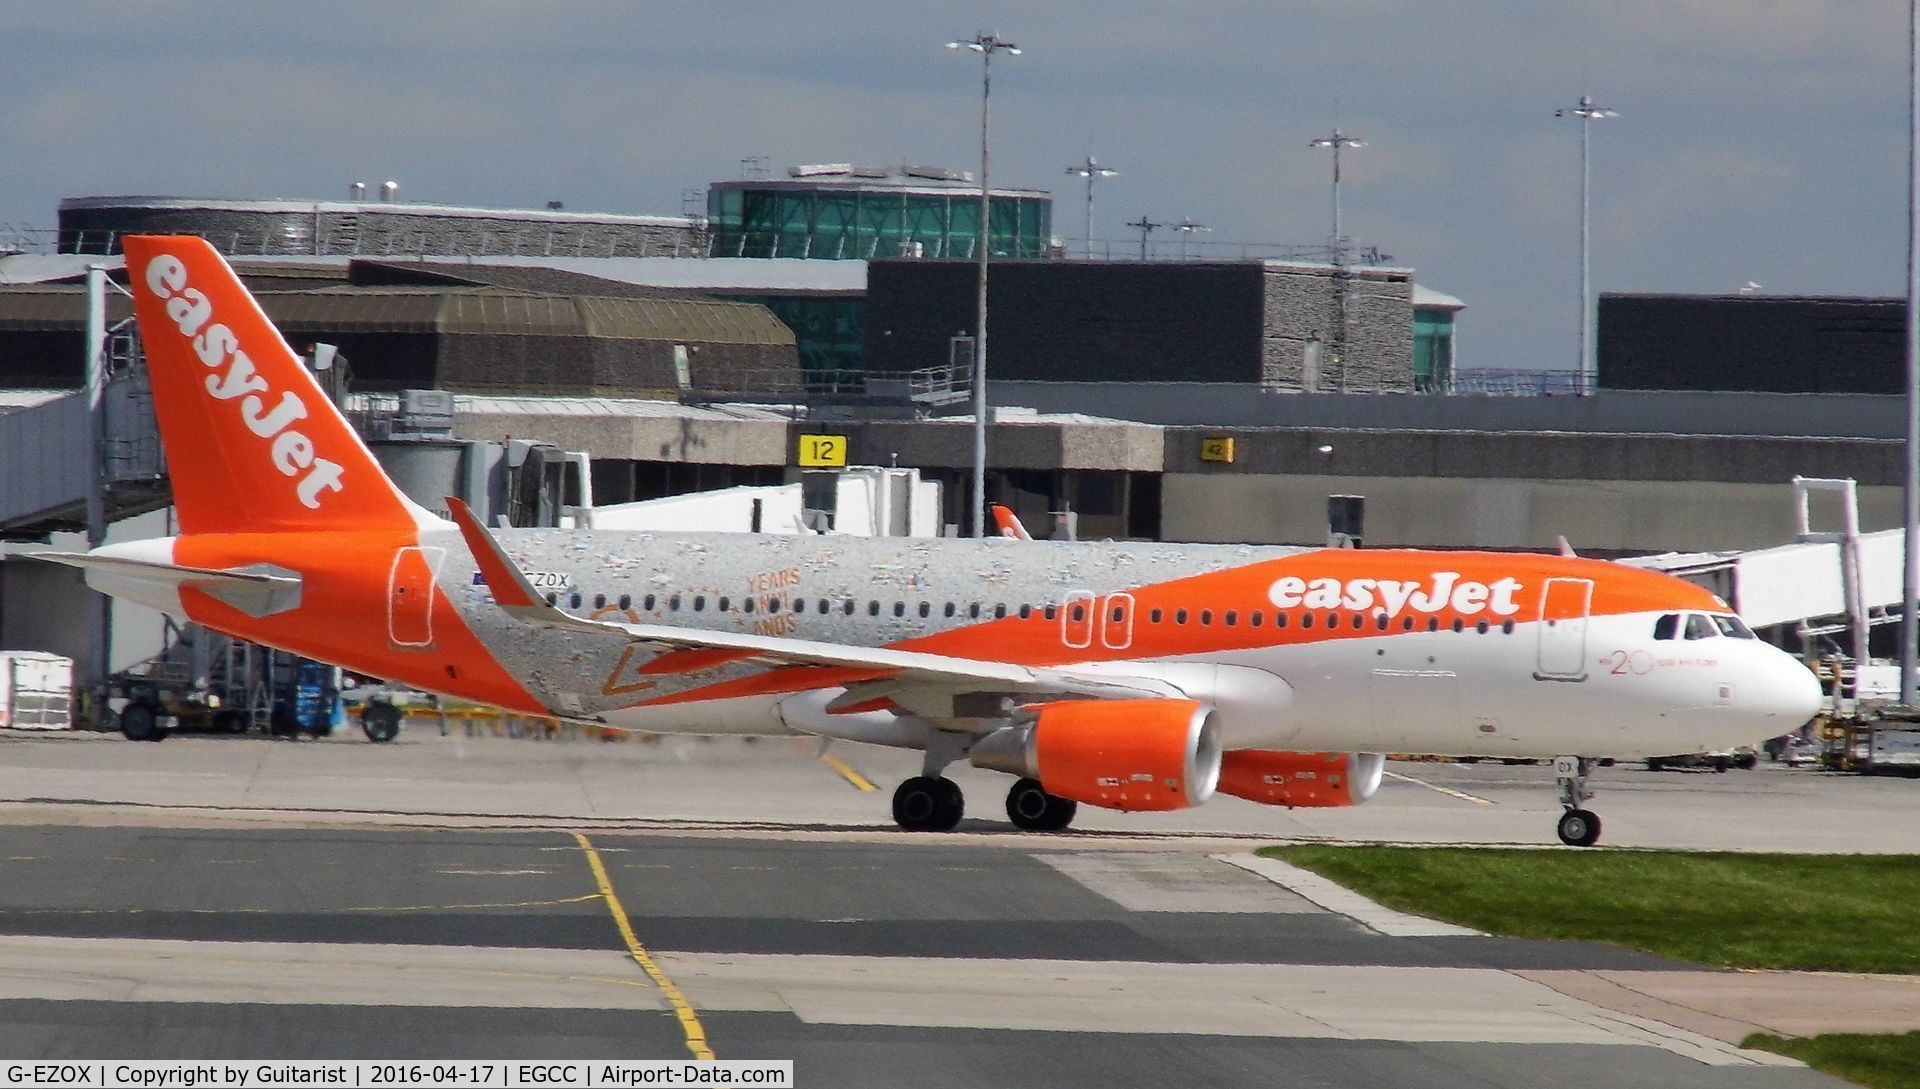 G-EZOX, 2015 Airbus A320-214 C/N 6837, At Manchester